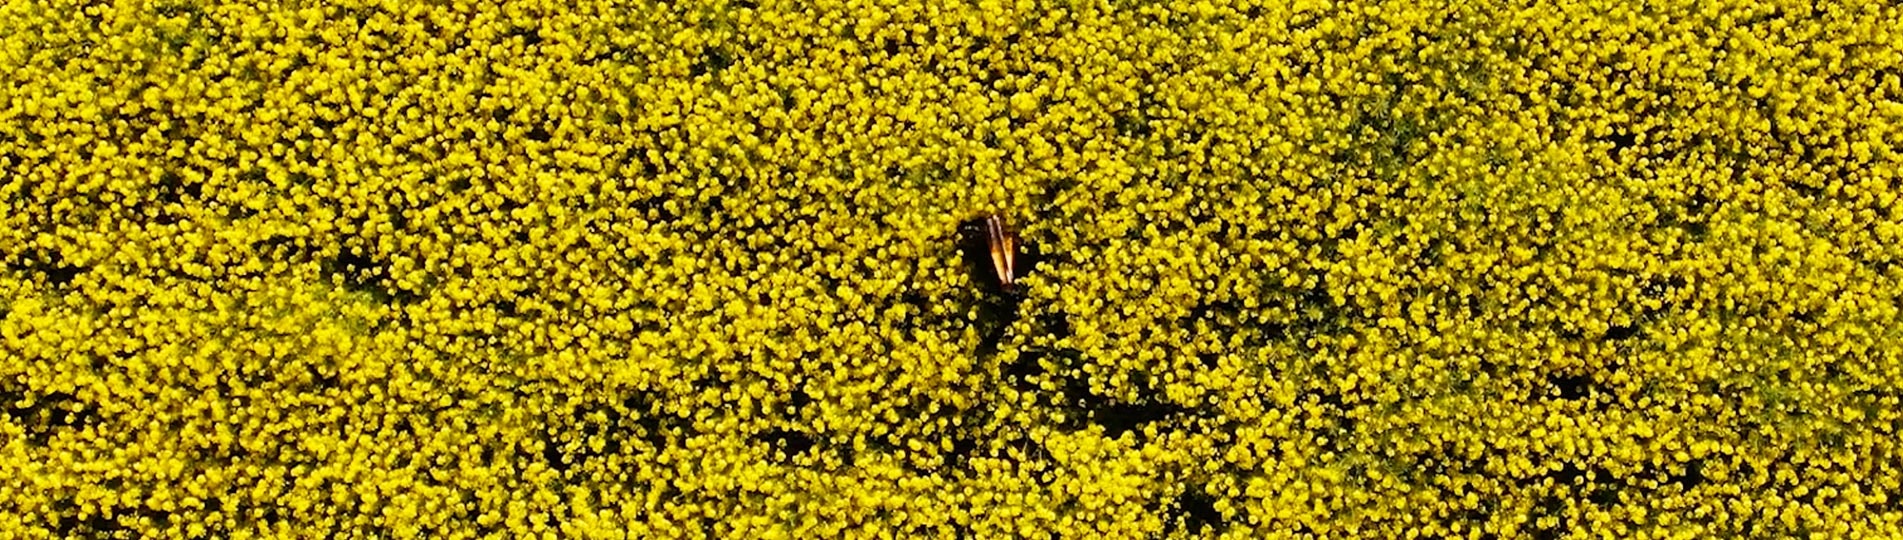 A top down photo of a harpist in the middle of a field of canola flowers